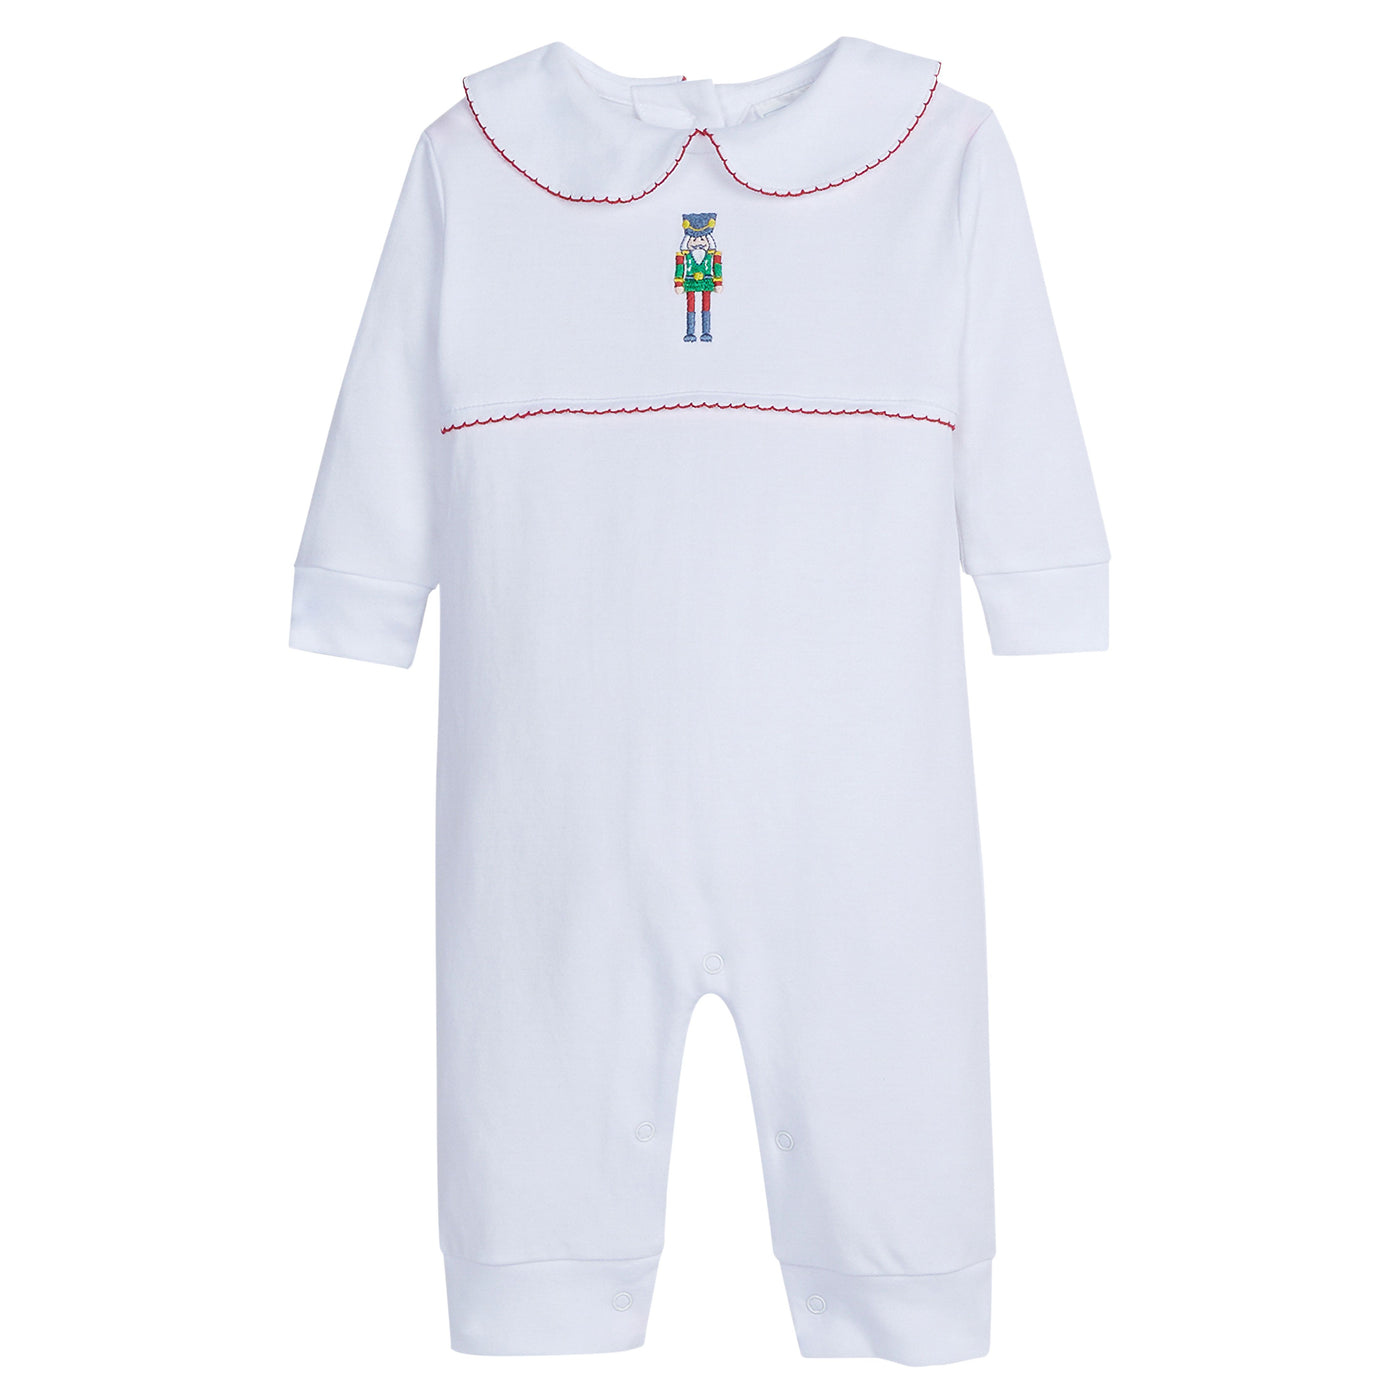 Embroidered Playsuit Nutcracker